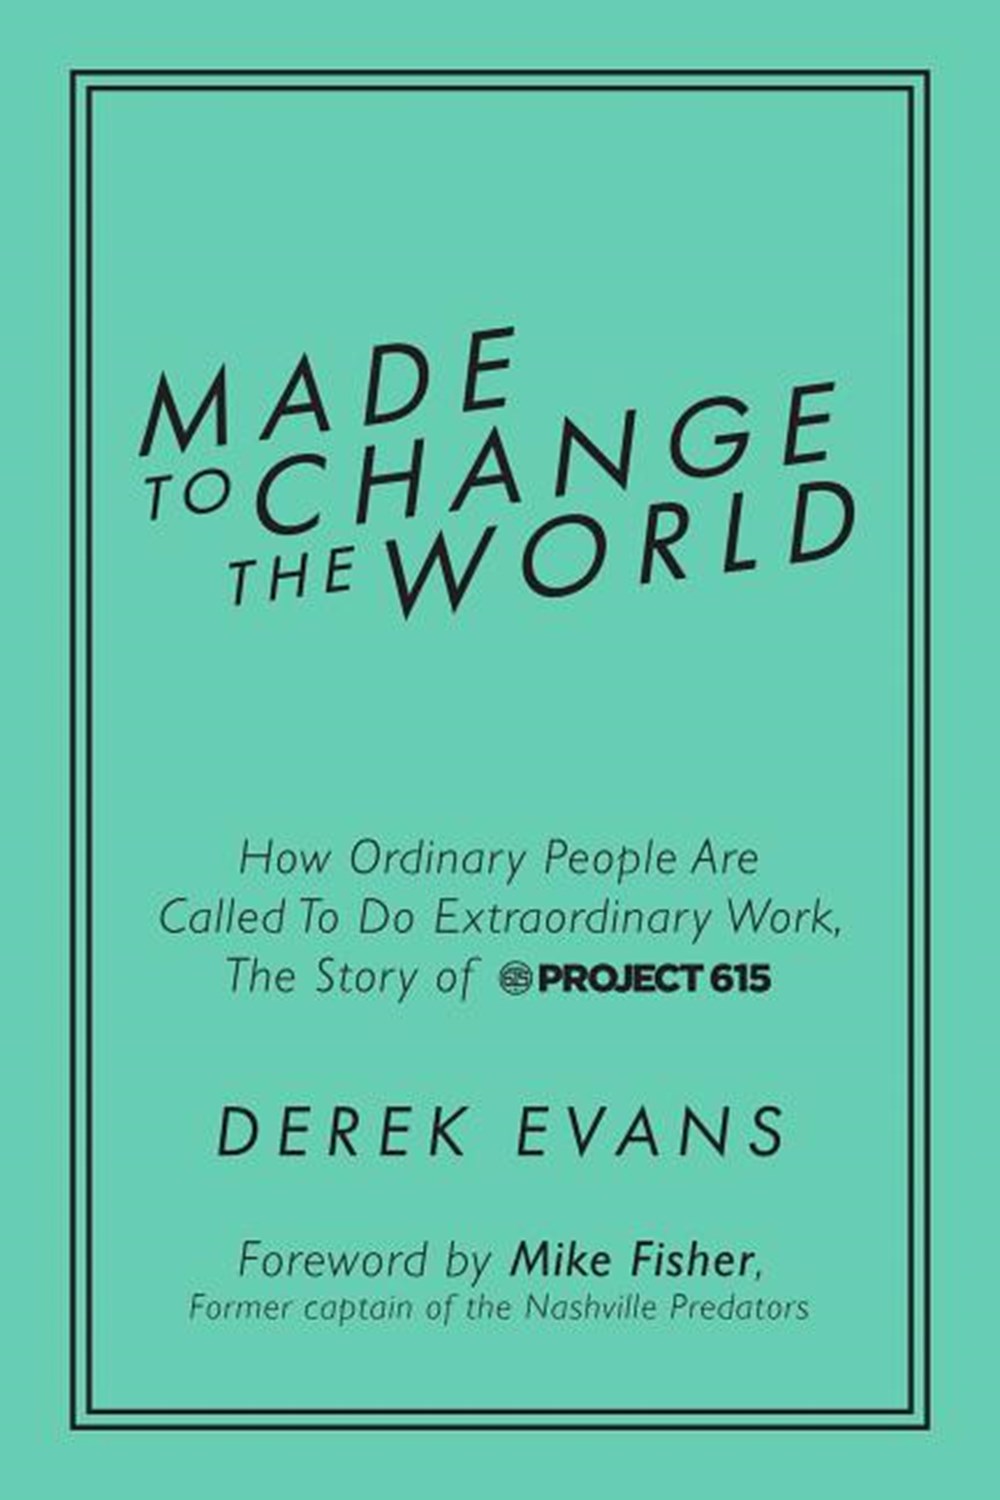 Made to Change the World How Ordinary People Are Called to Do Extraordinary Work, the Story of Proje